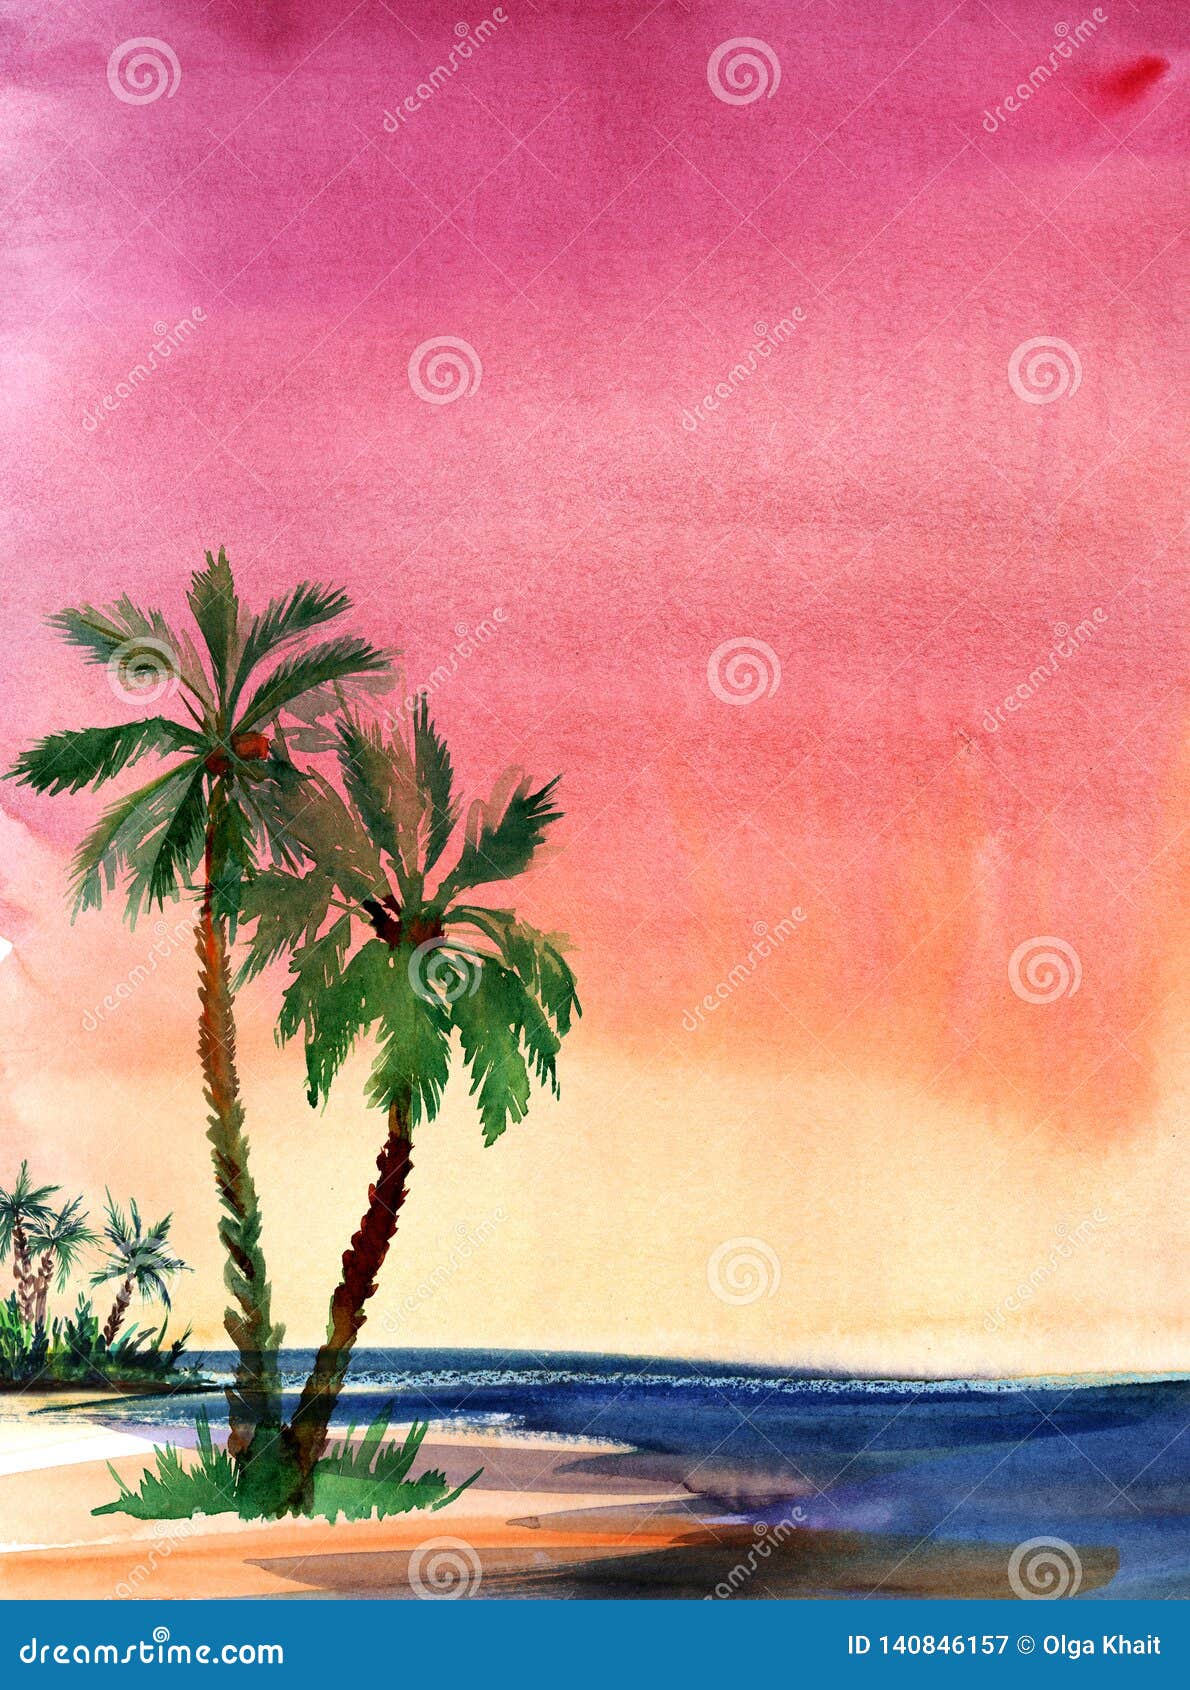 Watercolor Landscape Evening Sky At Sunset The Gradient From Dark Purple To Pink To Orange To Yellow Blue Waves Of The Sea Stock Illustration Illustration Of Palm Gradient